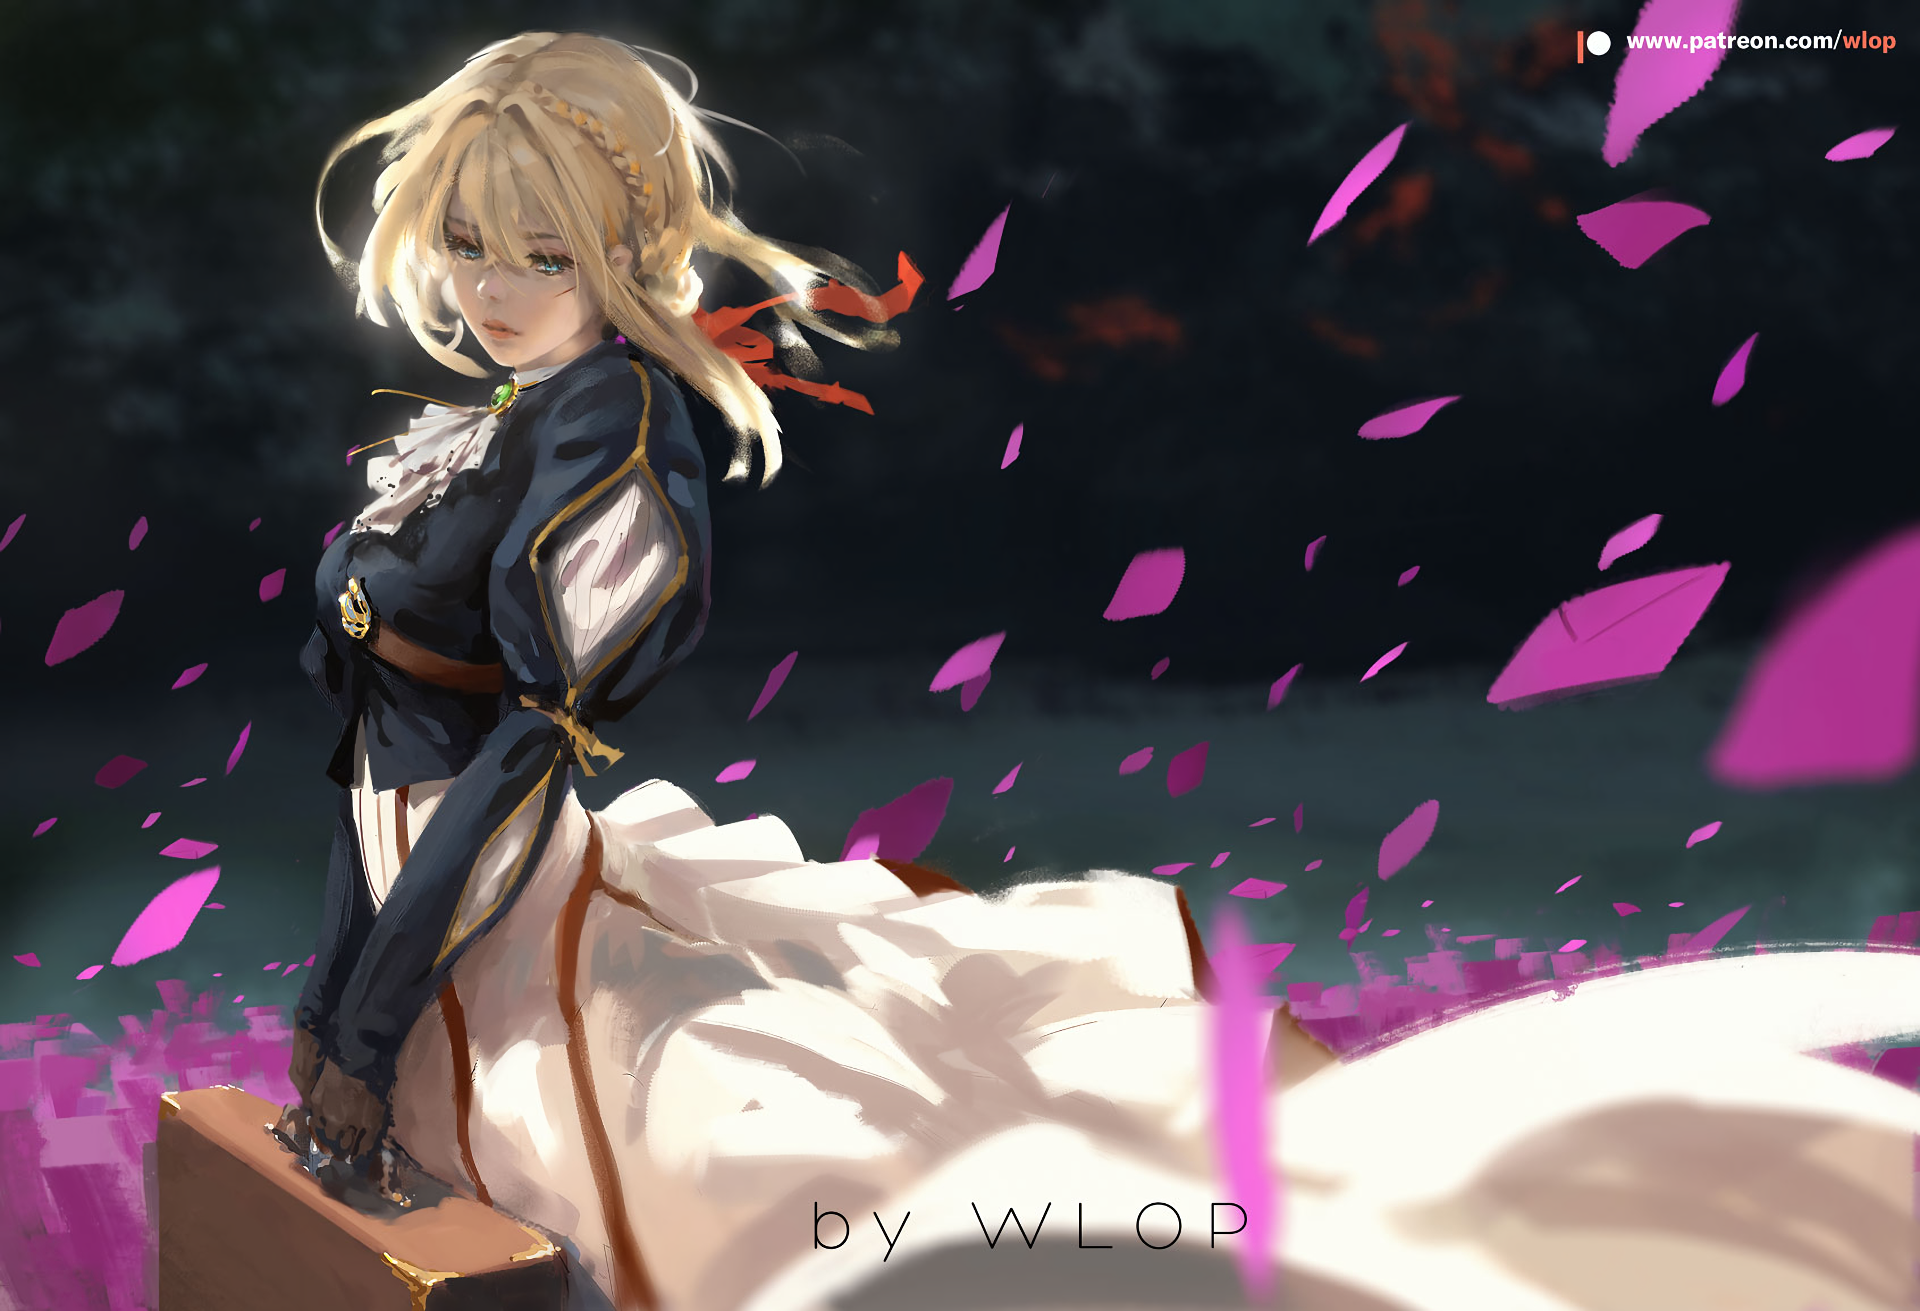 Violet Evergarden Art by Wang Ling